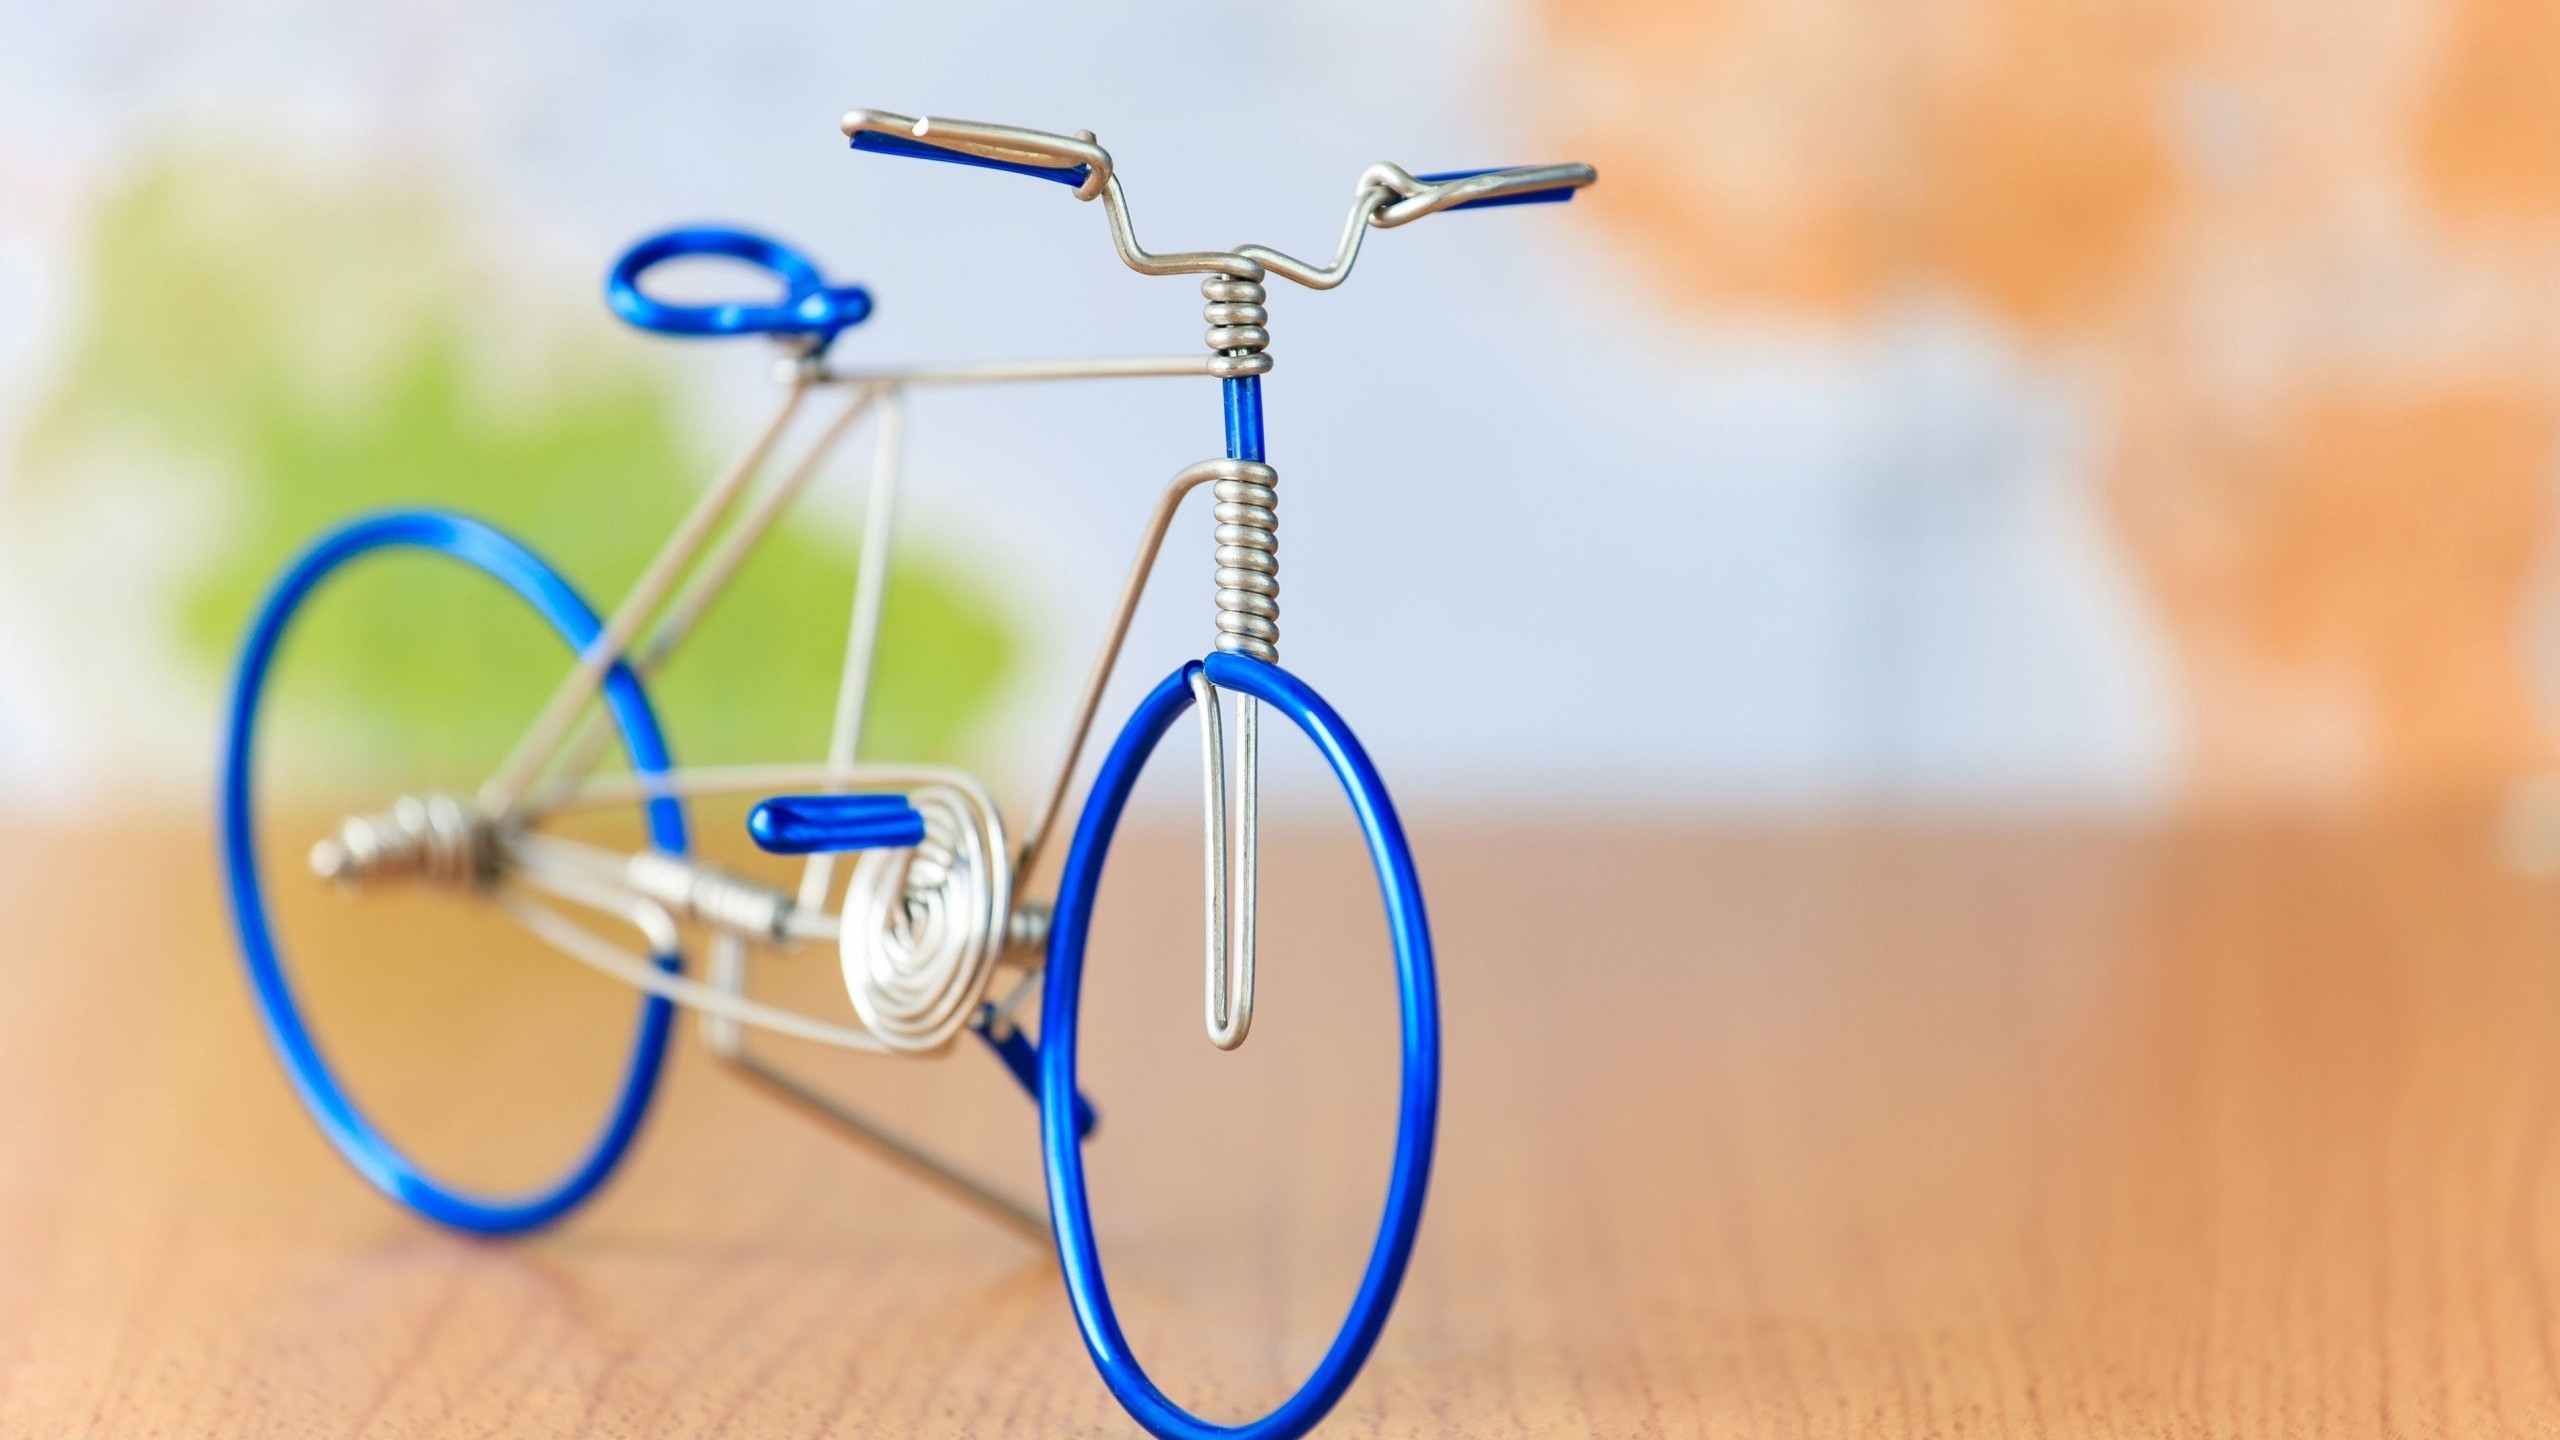 Handmade Bicycle for 2560x1440 HDTV resolution